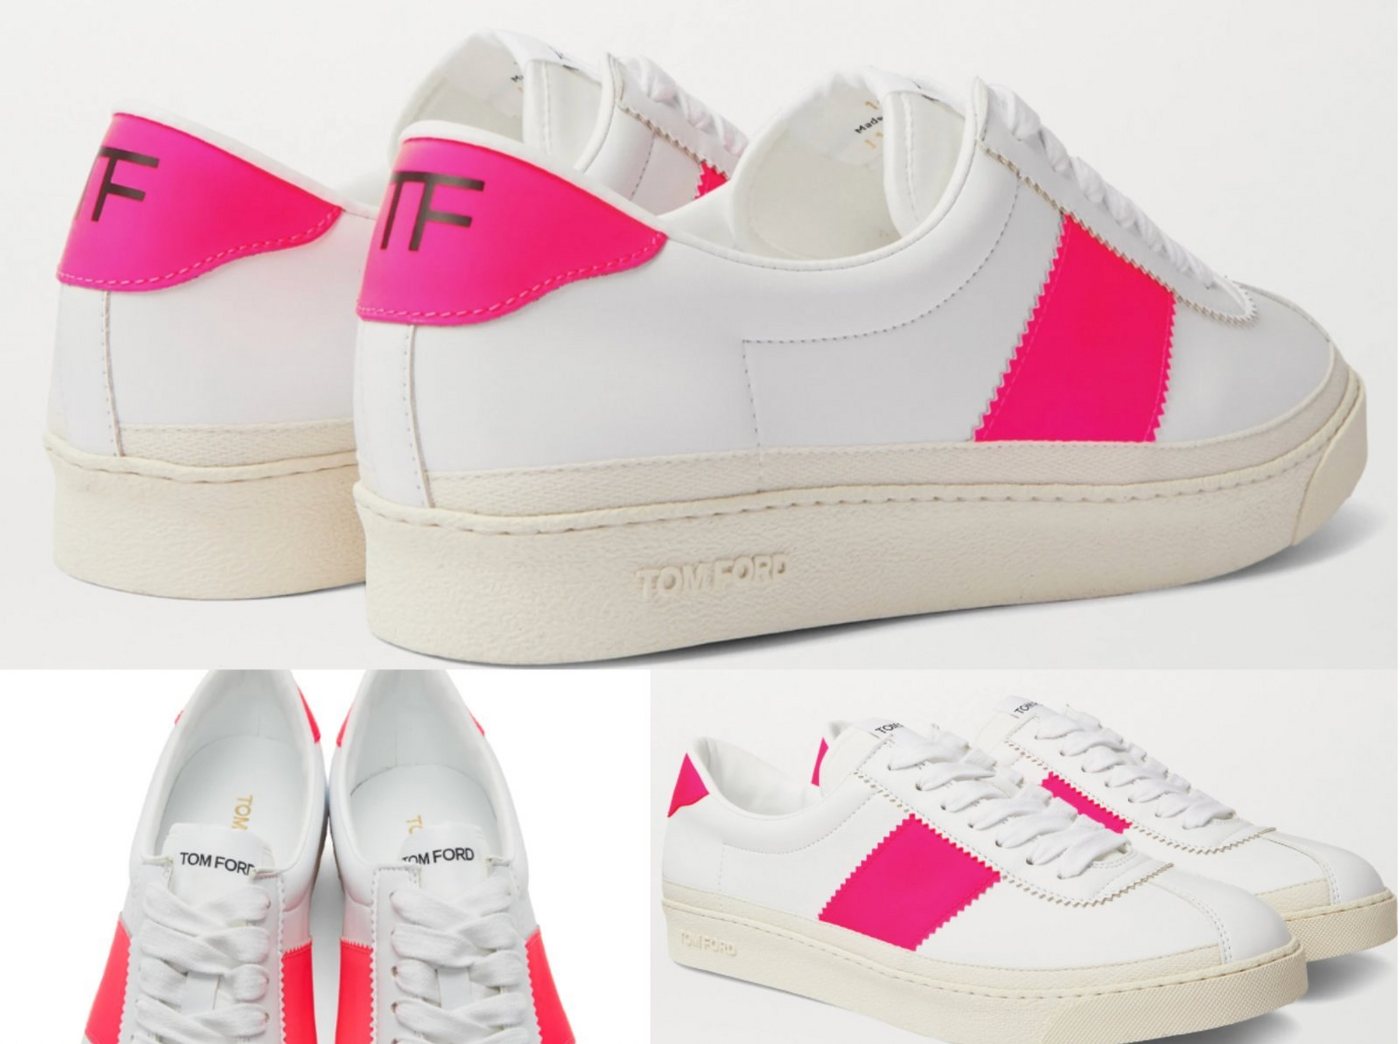 Tom Ford TOM FORD Pink Bannister Sneakers Schuhe Shoes Trainers Turnschuhe Trai Sneaker von Tom Ford